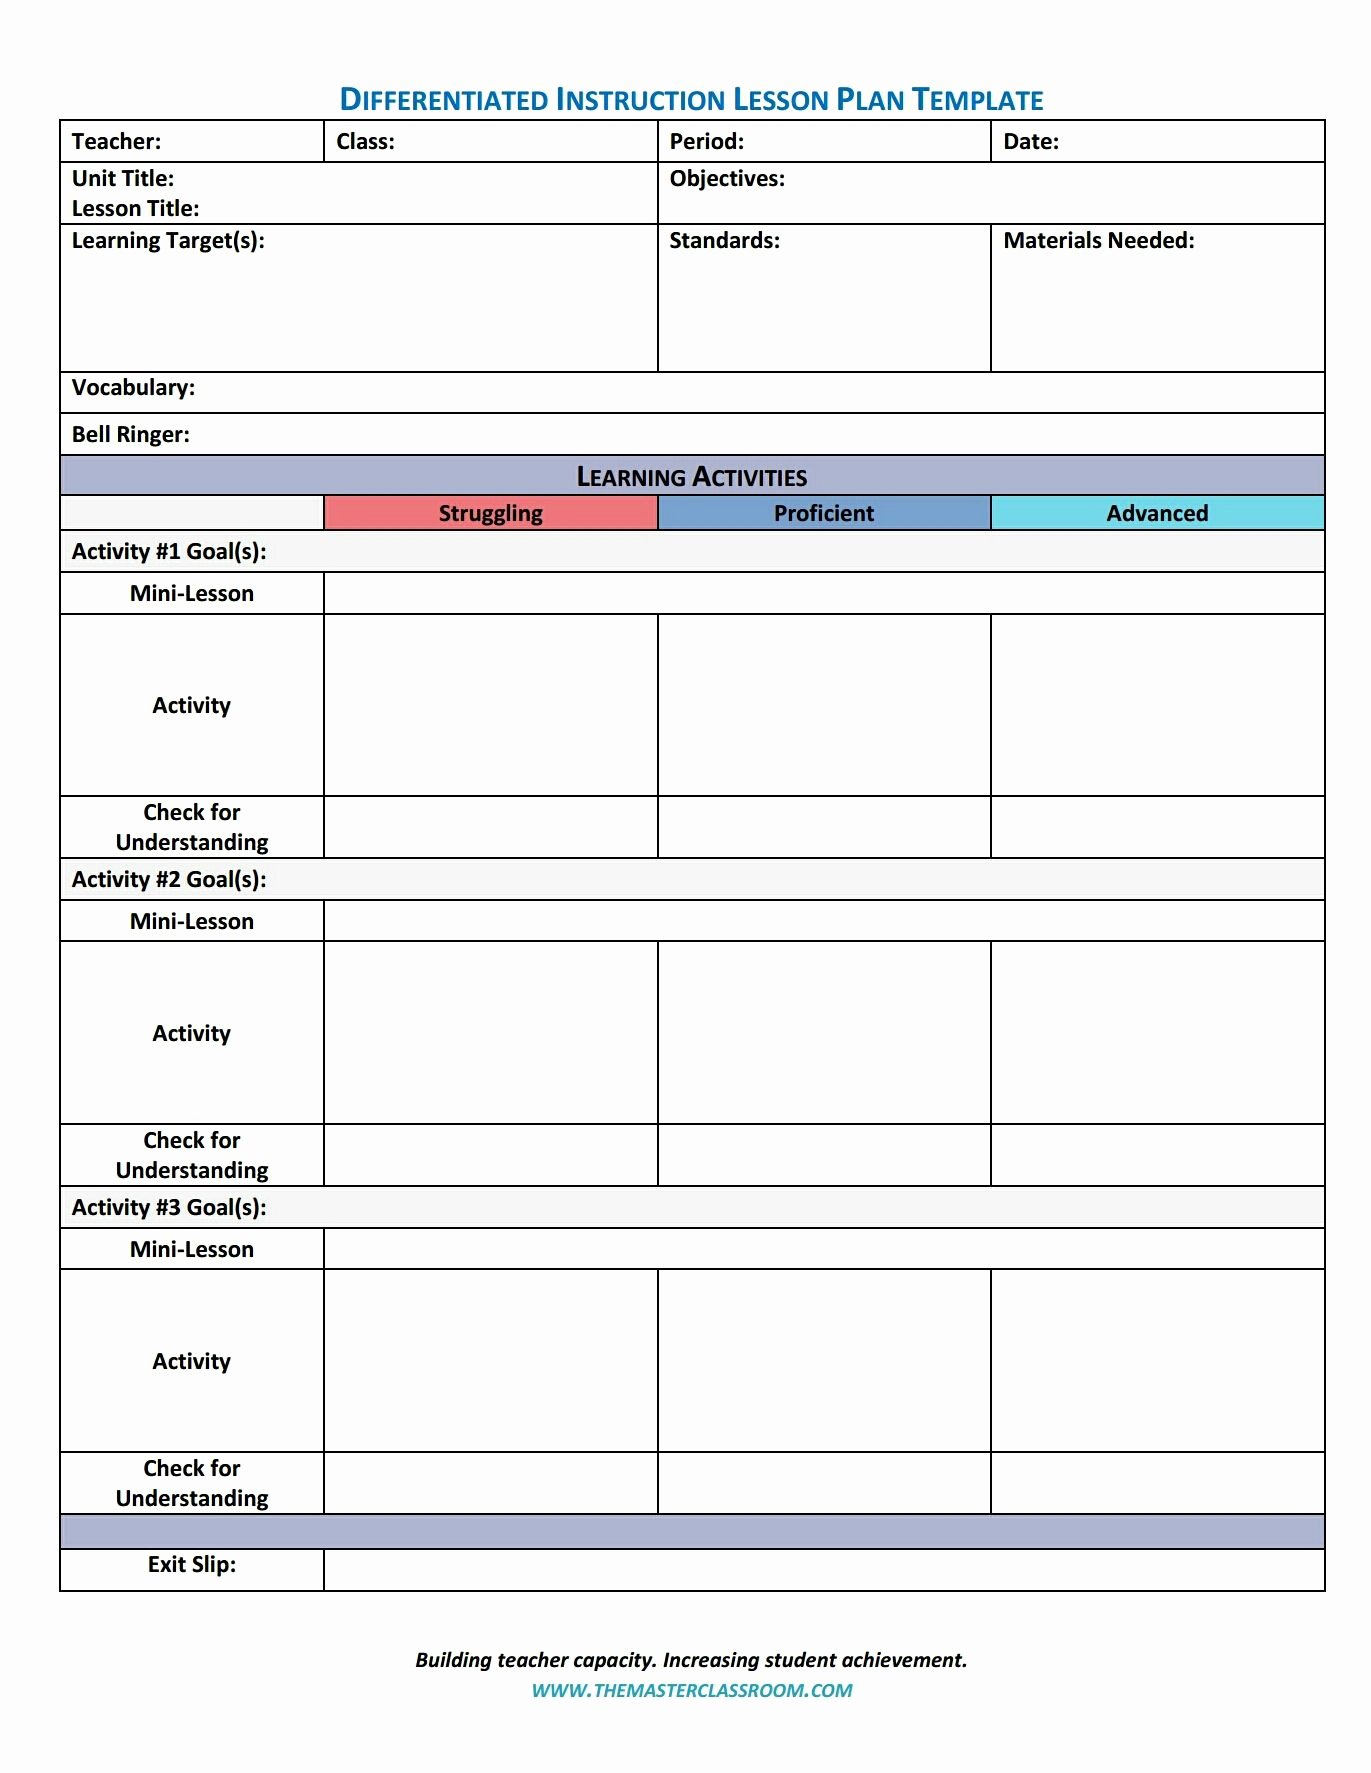 Spanish Lesson Plan Template Luxury Differentiated Instruction Lesson Plan Template Freebie